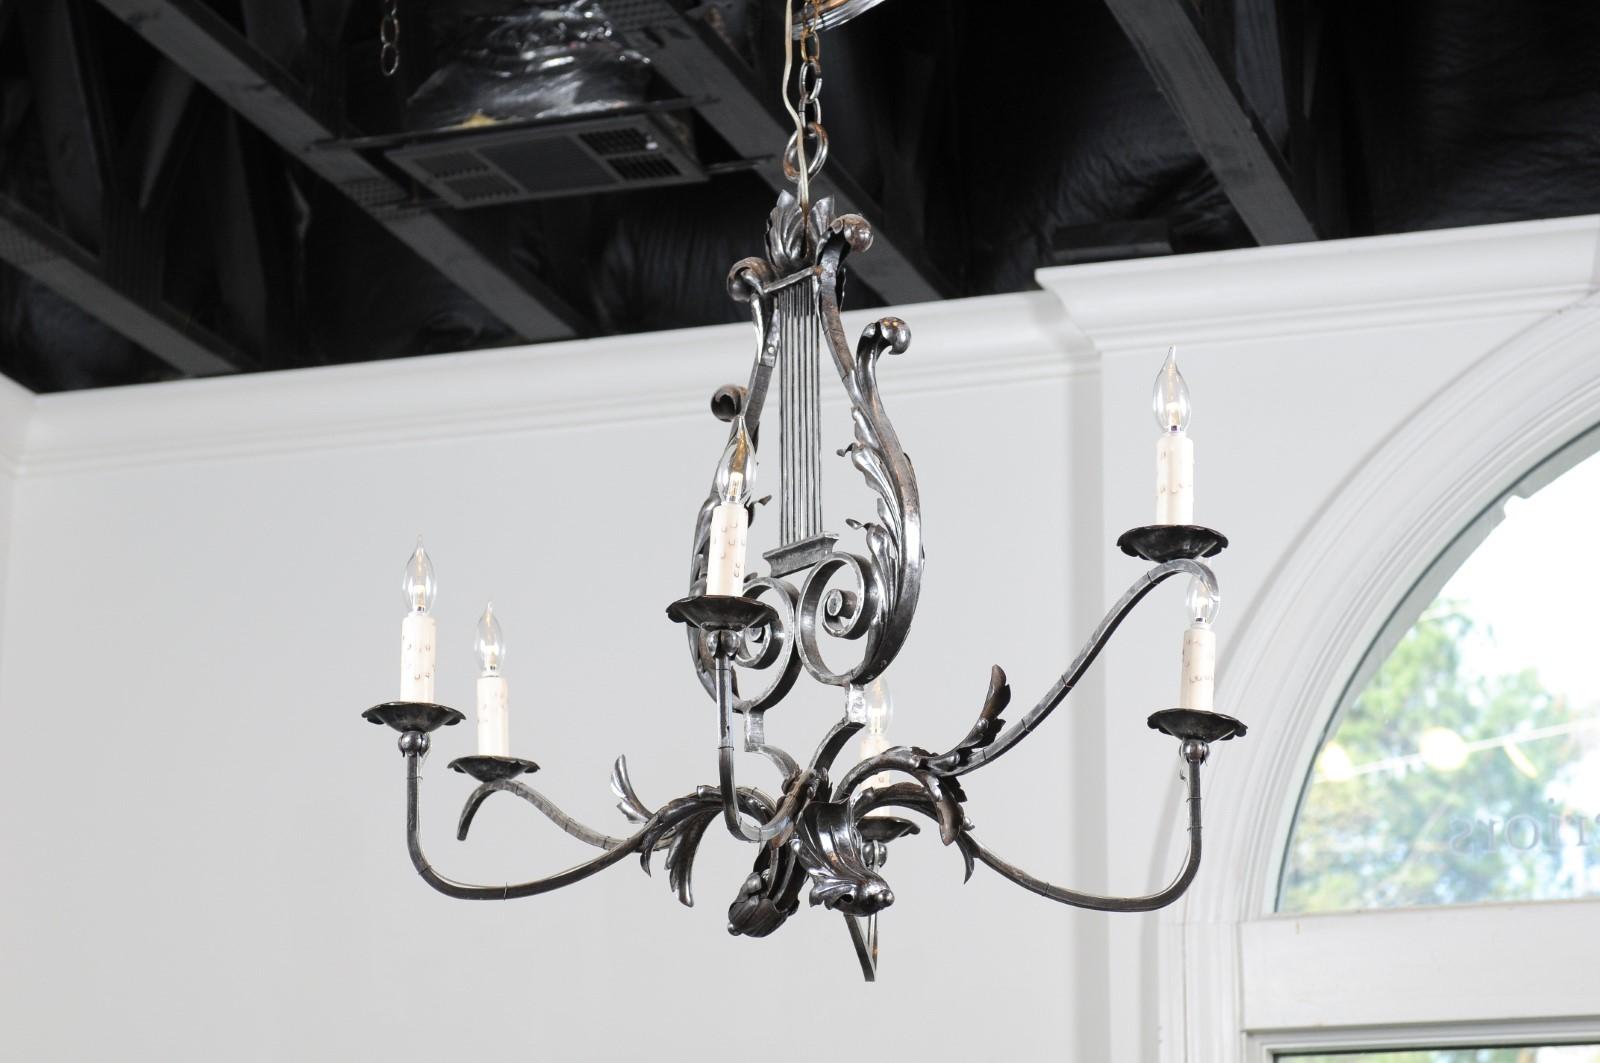 A French six-light iron chandelier from the 19th century, with lyre and acanthus leaf motifs. Born in France during the 19th century, this iron chandelier features a central lyre motif reminiscent of Apollo's personal instrument, accented with